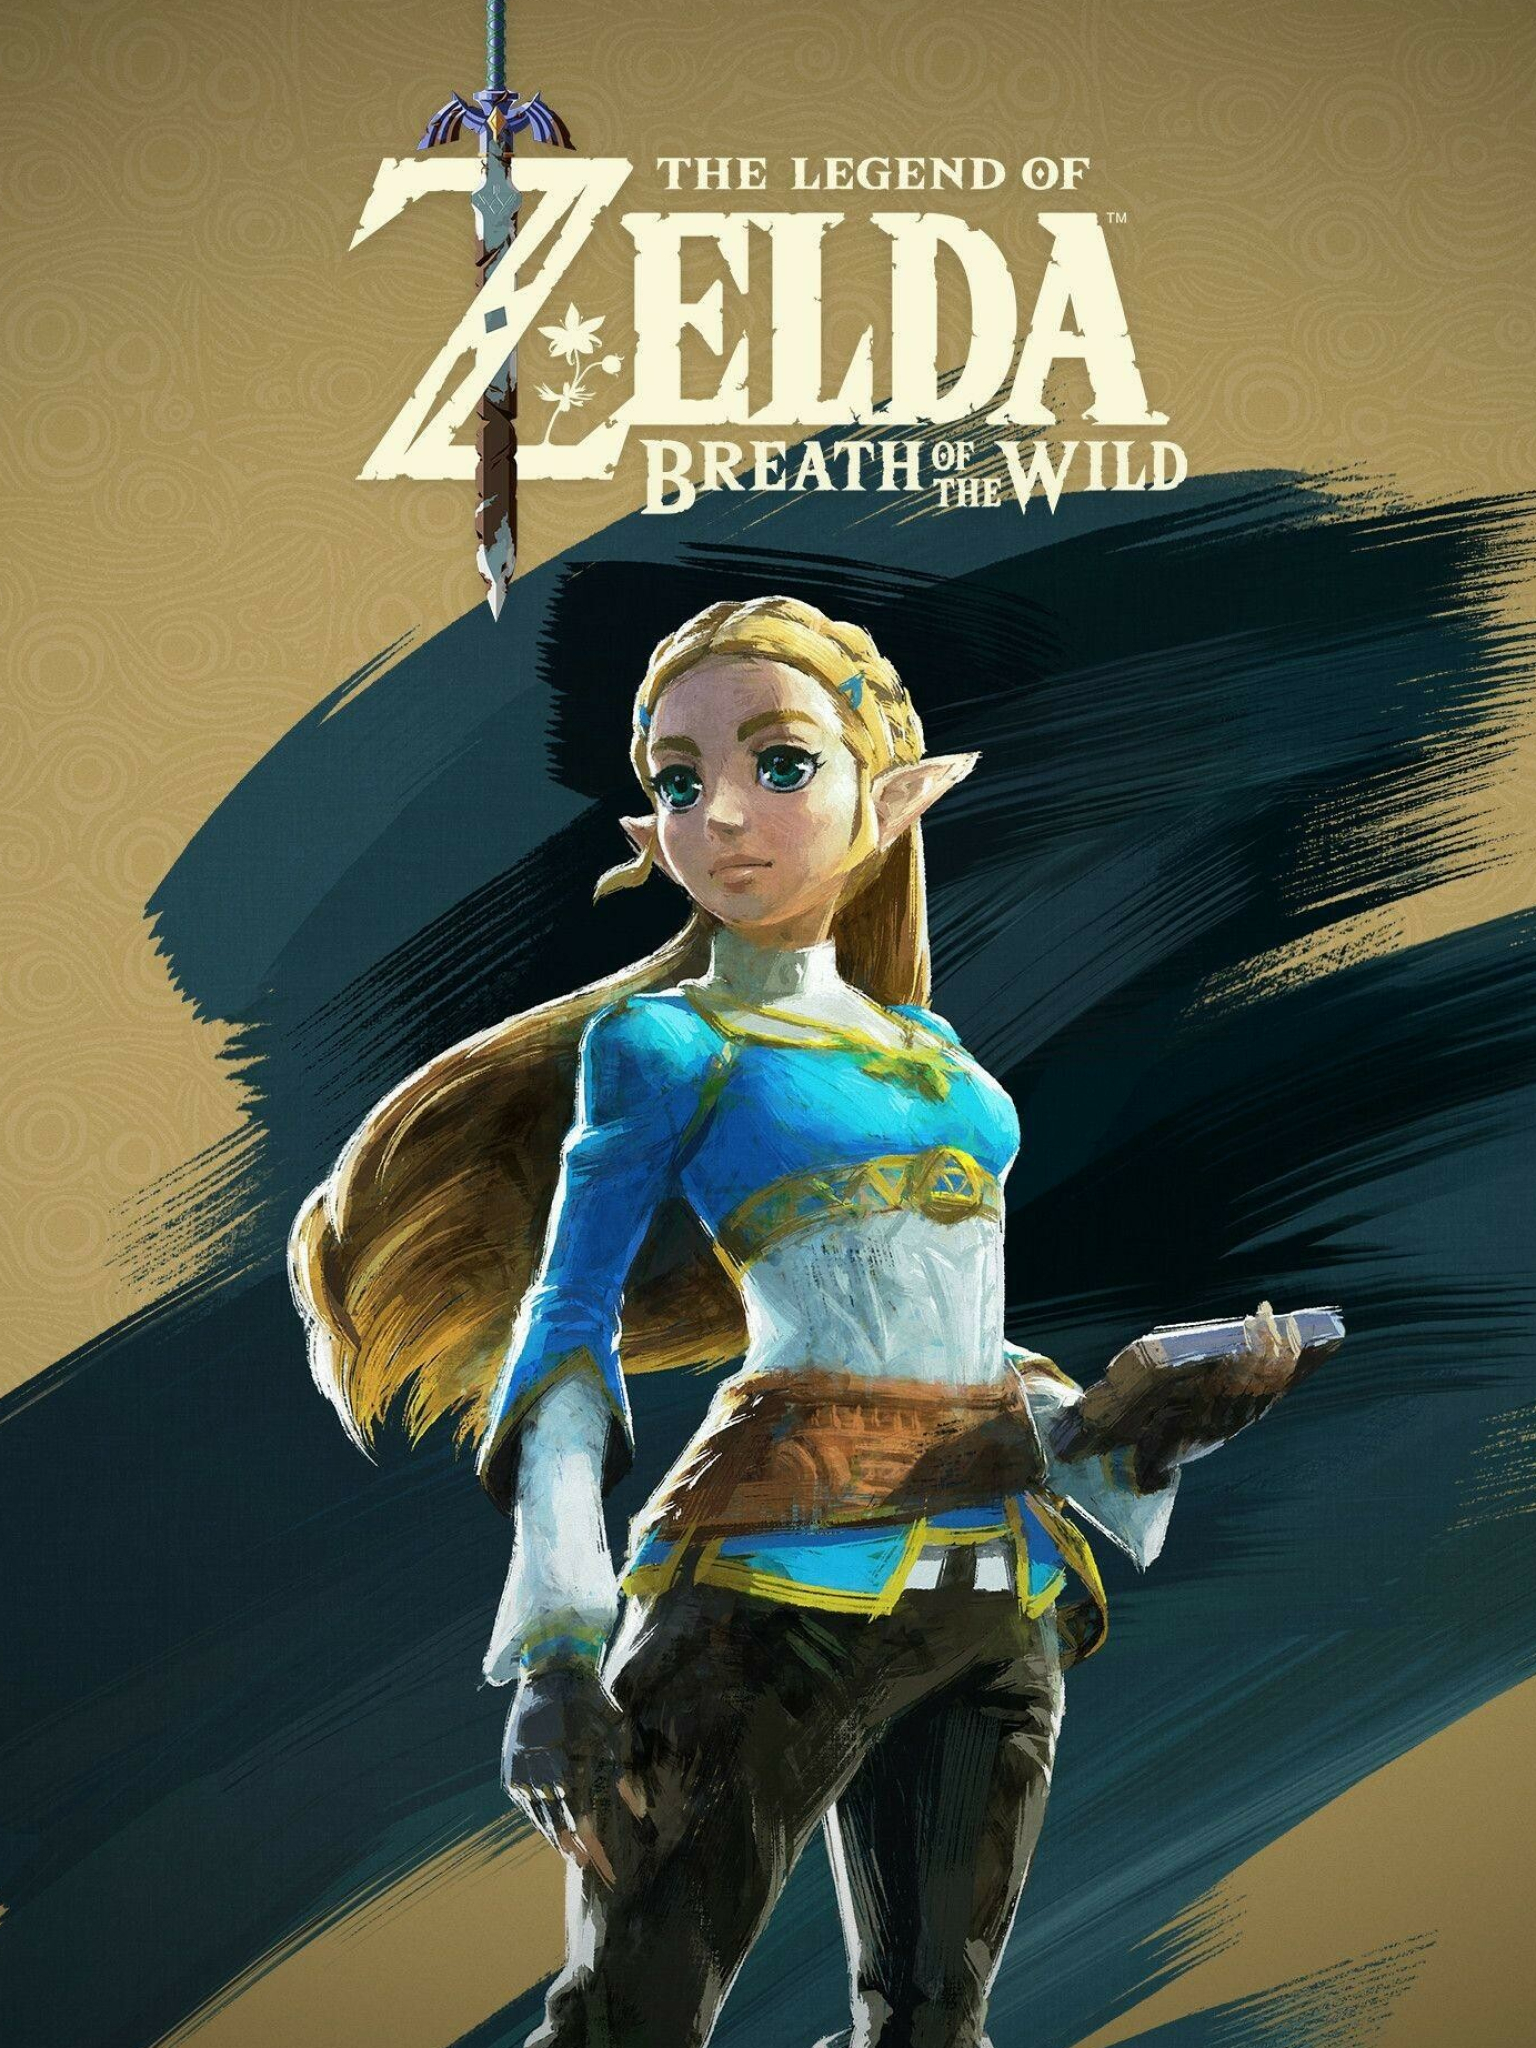 The Legend of Zelda: Princess, Breath of the Wild, Won the award for Most Anticipated Game at the Game Awards 2016. 1540x2050 HD Wallpaper.